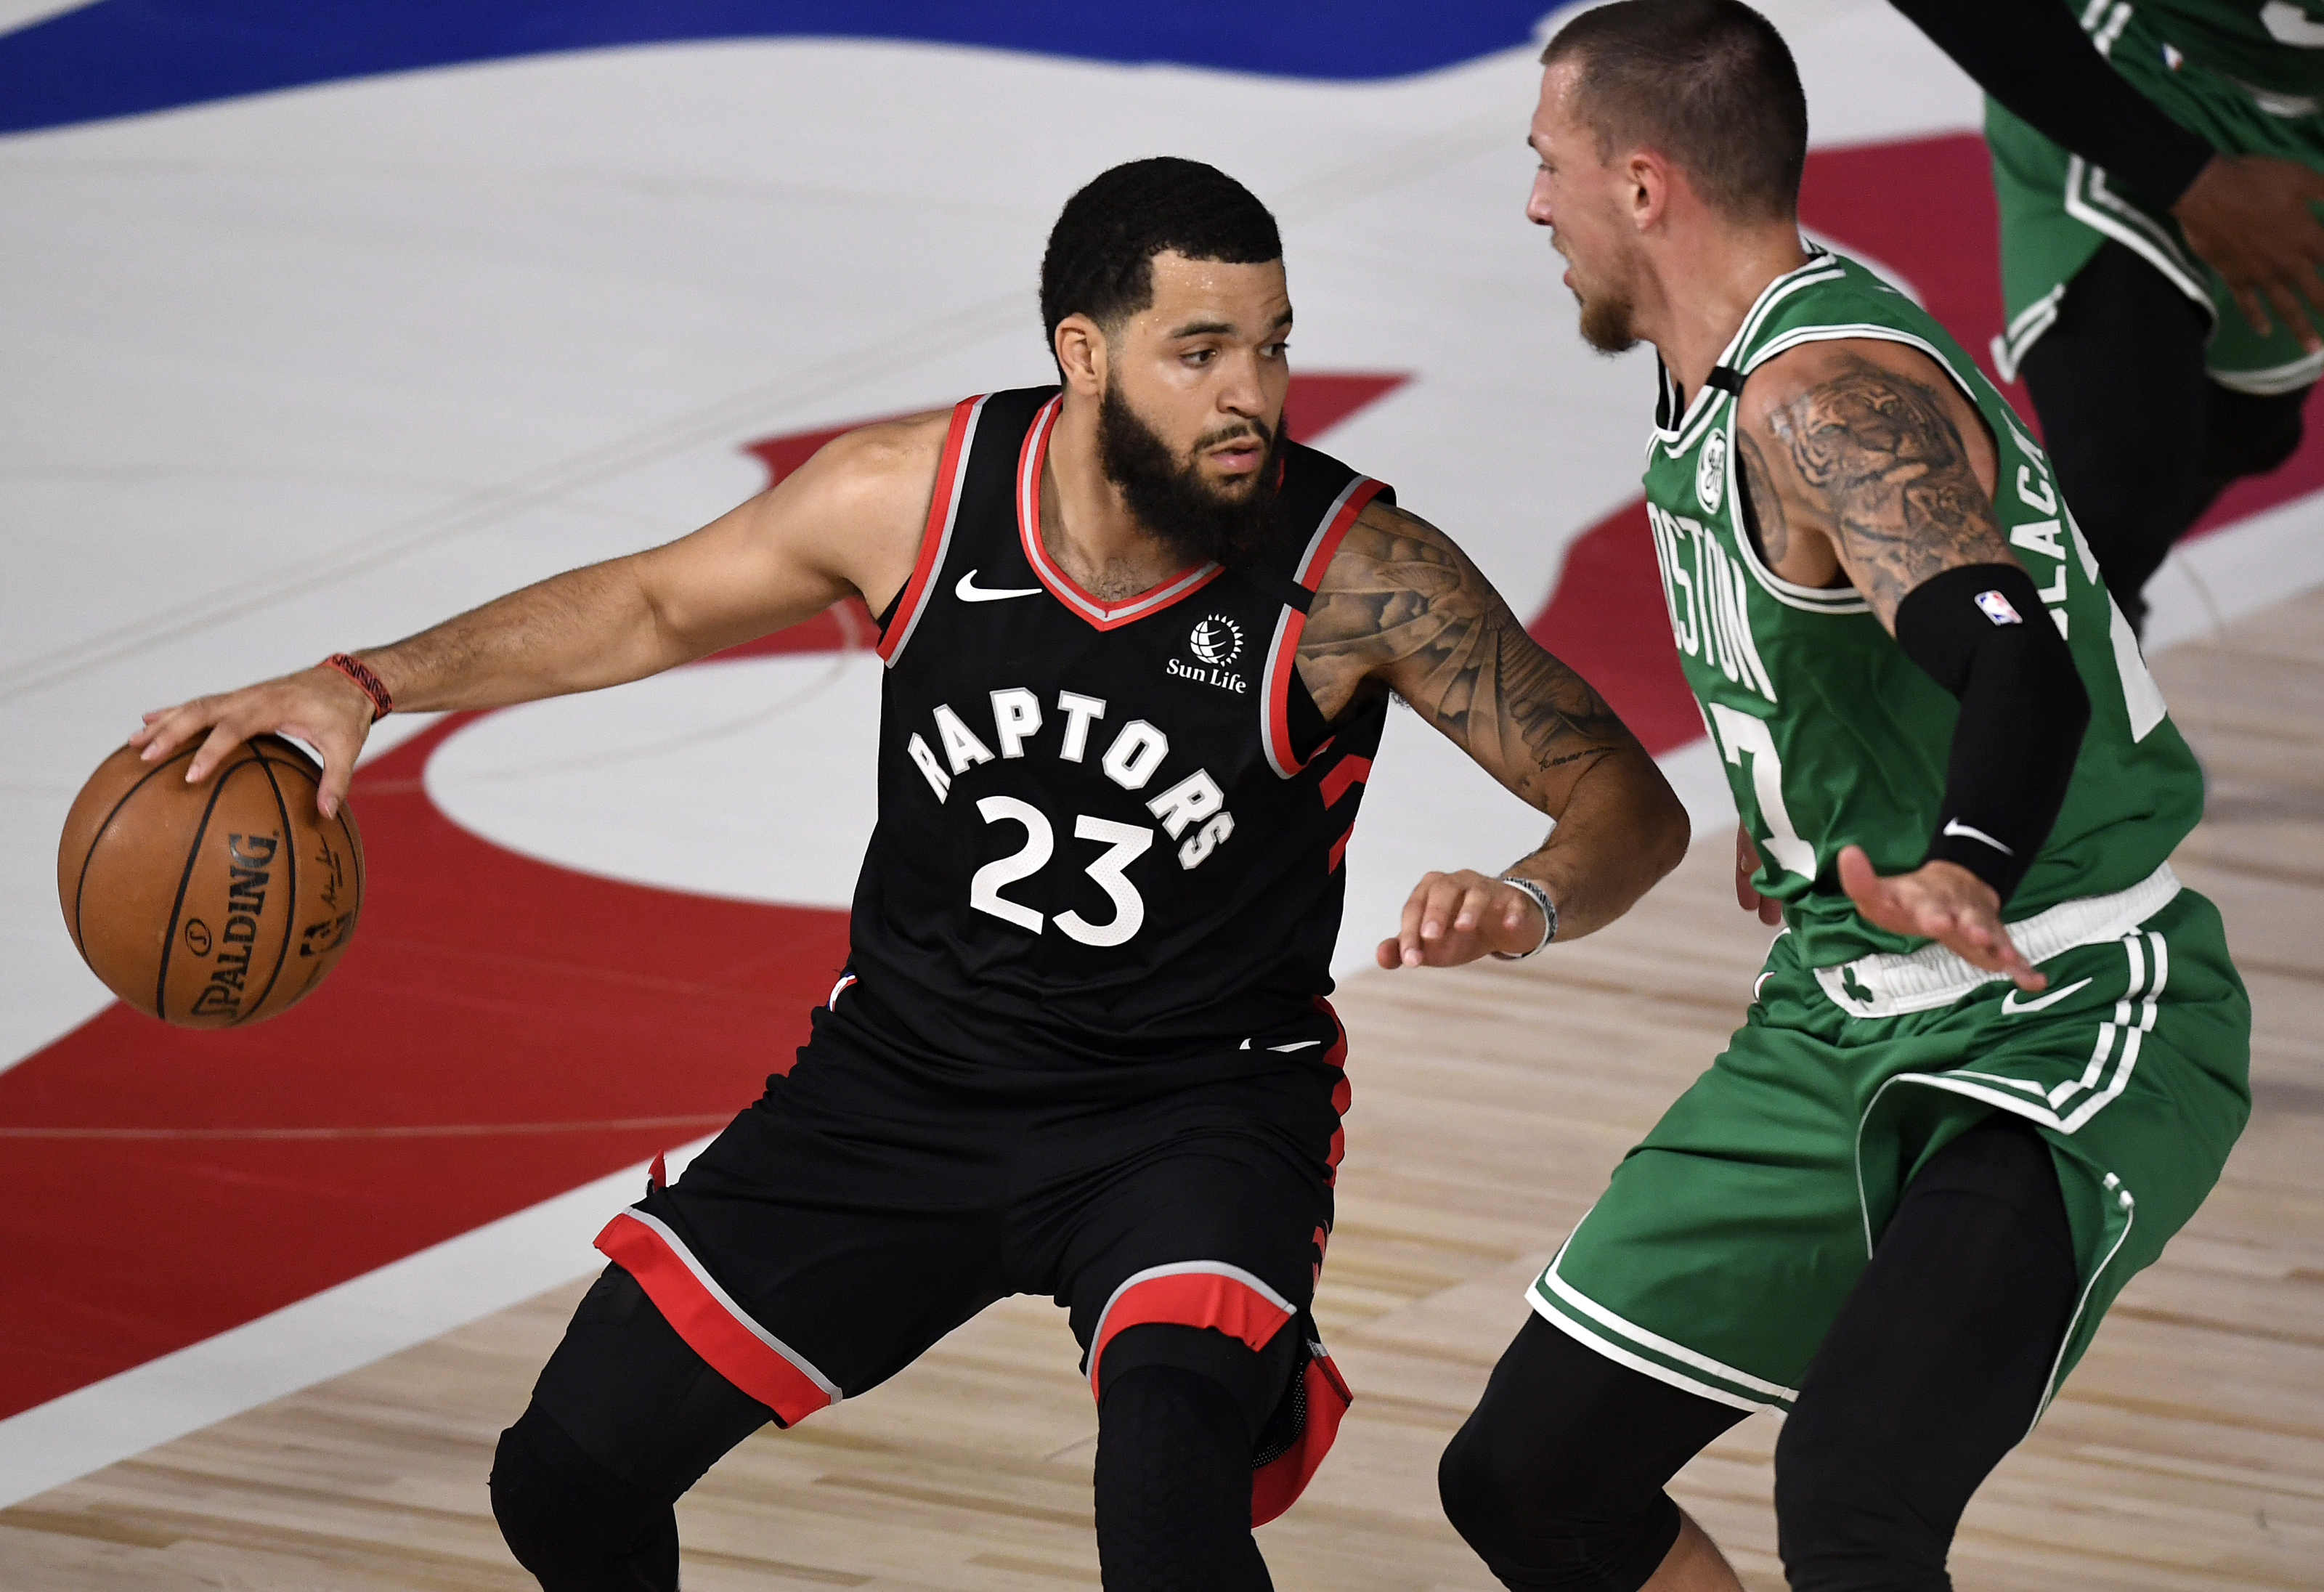 Fred VanVleet Leaving The Toronto Raptors Could Be Costly For Pascal Siakam